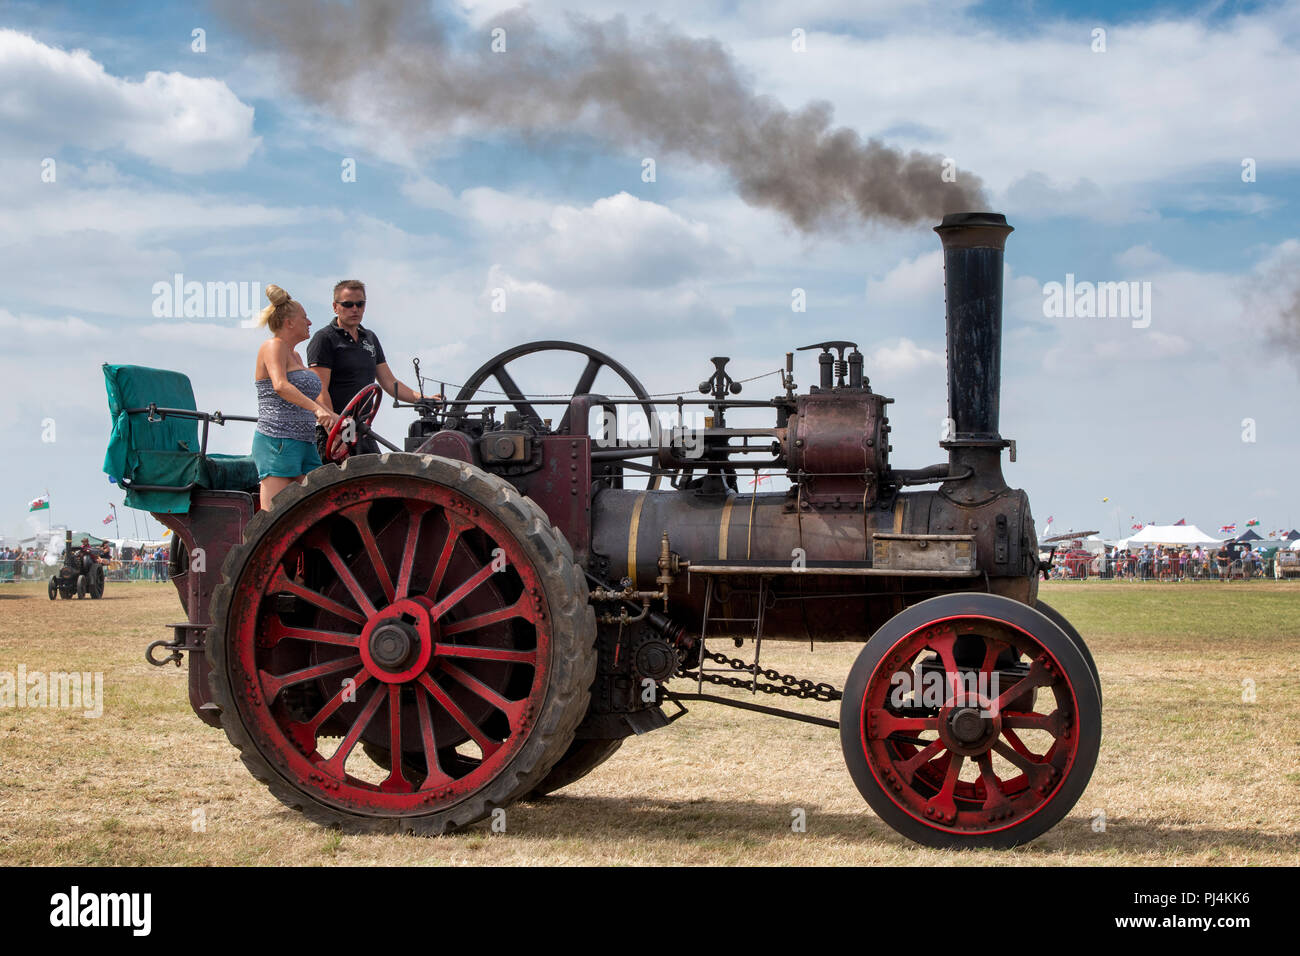 Traction engine at a steam fair in England Stock Photo